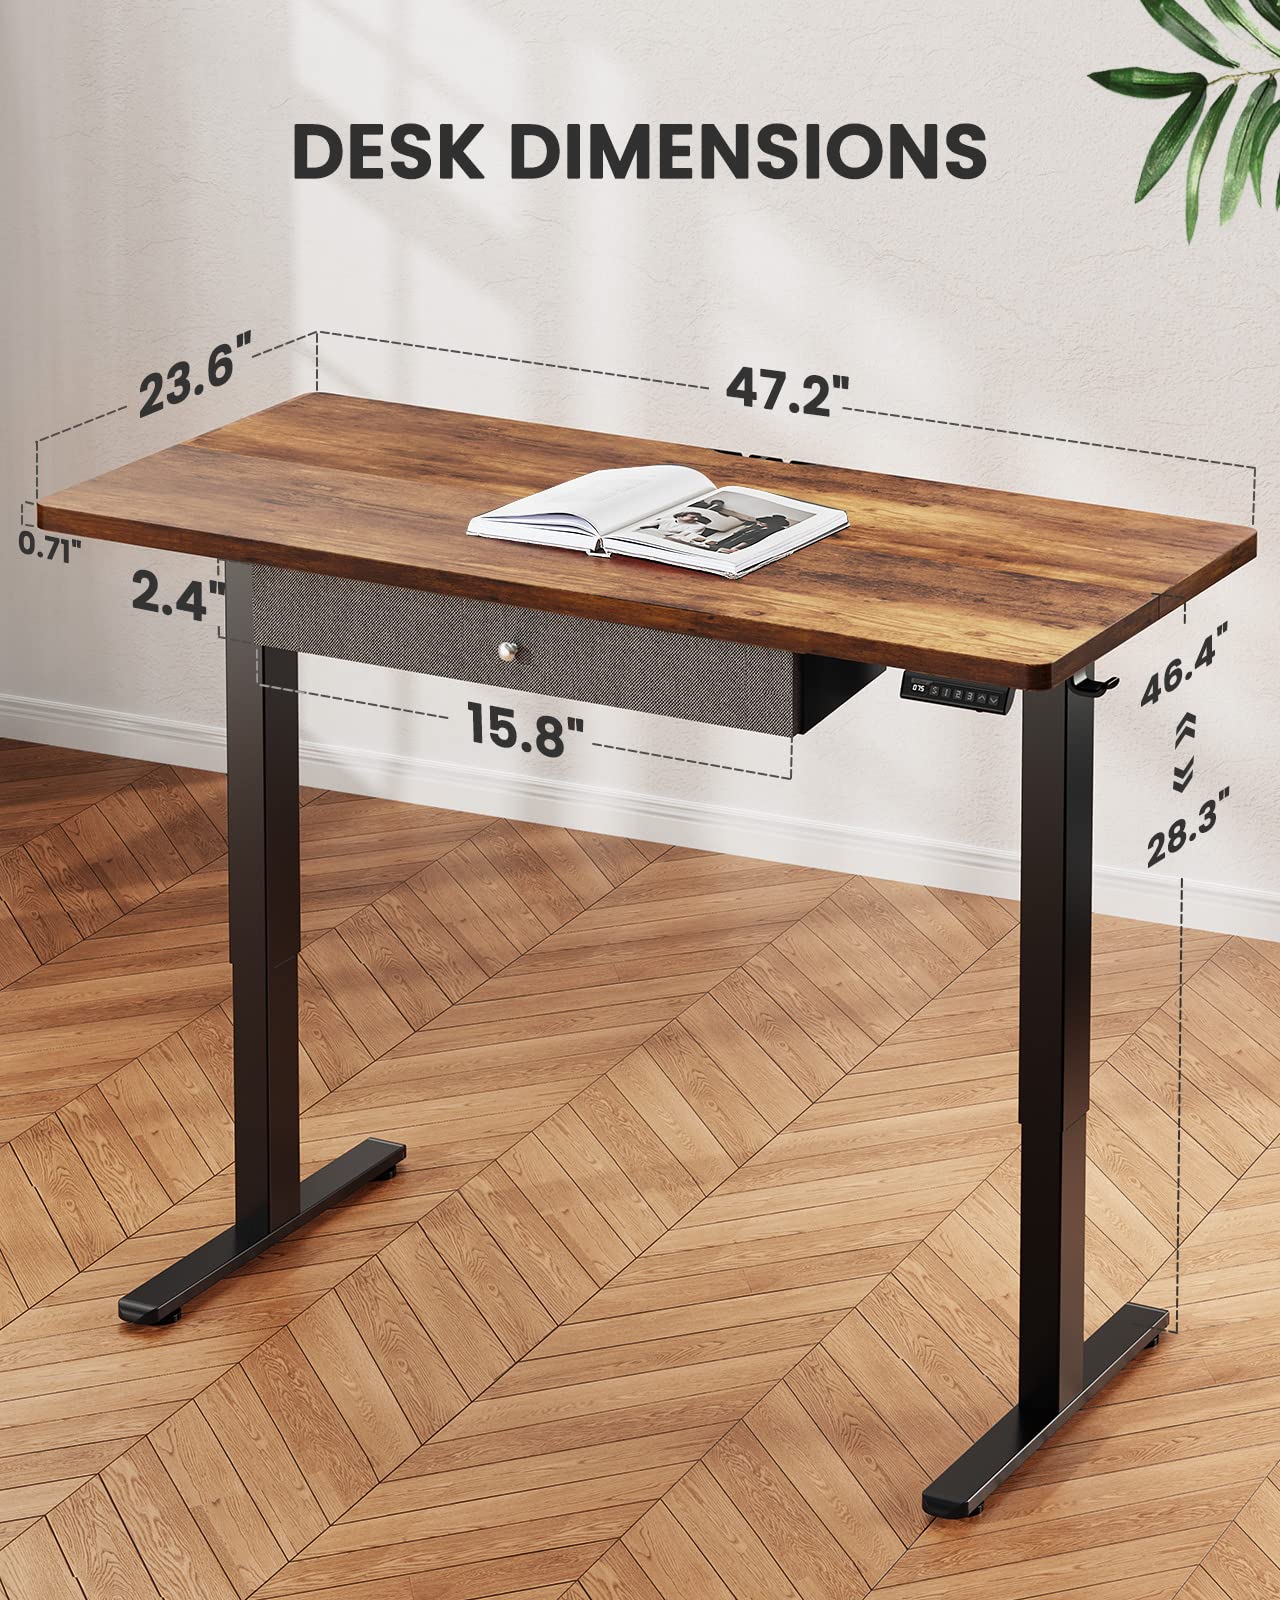 ErGear Electric Standing Desk with Drawer, Adjustable Height Sit Stand Up Desk, Home Office Desk Computer Workstation, 48x24 Inches, Vintage Brown